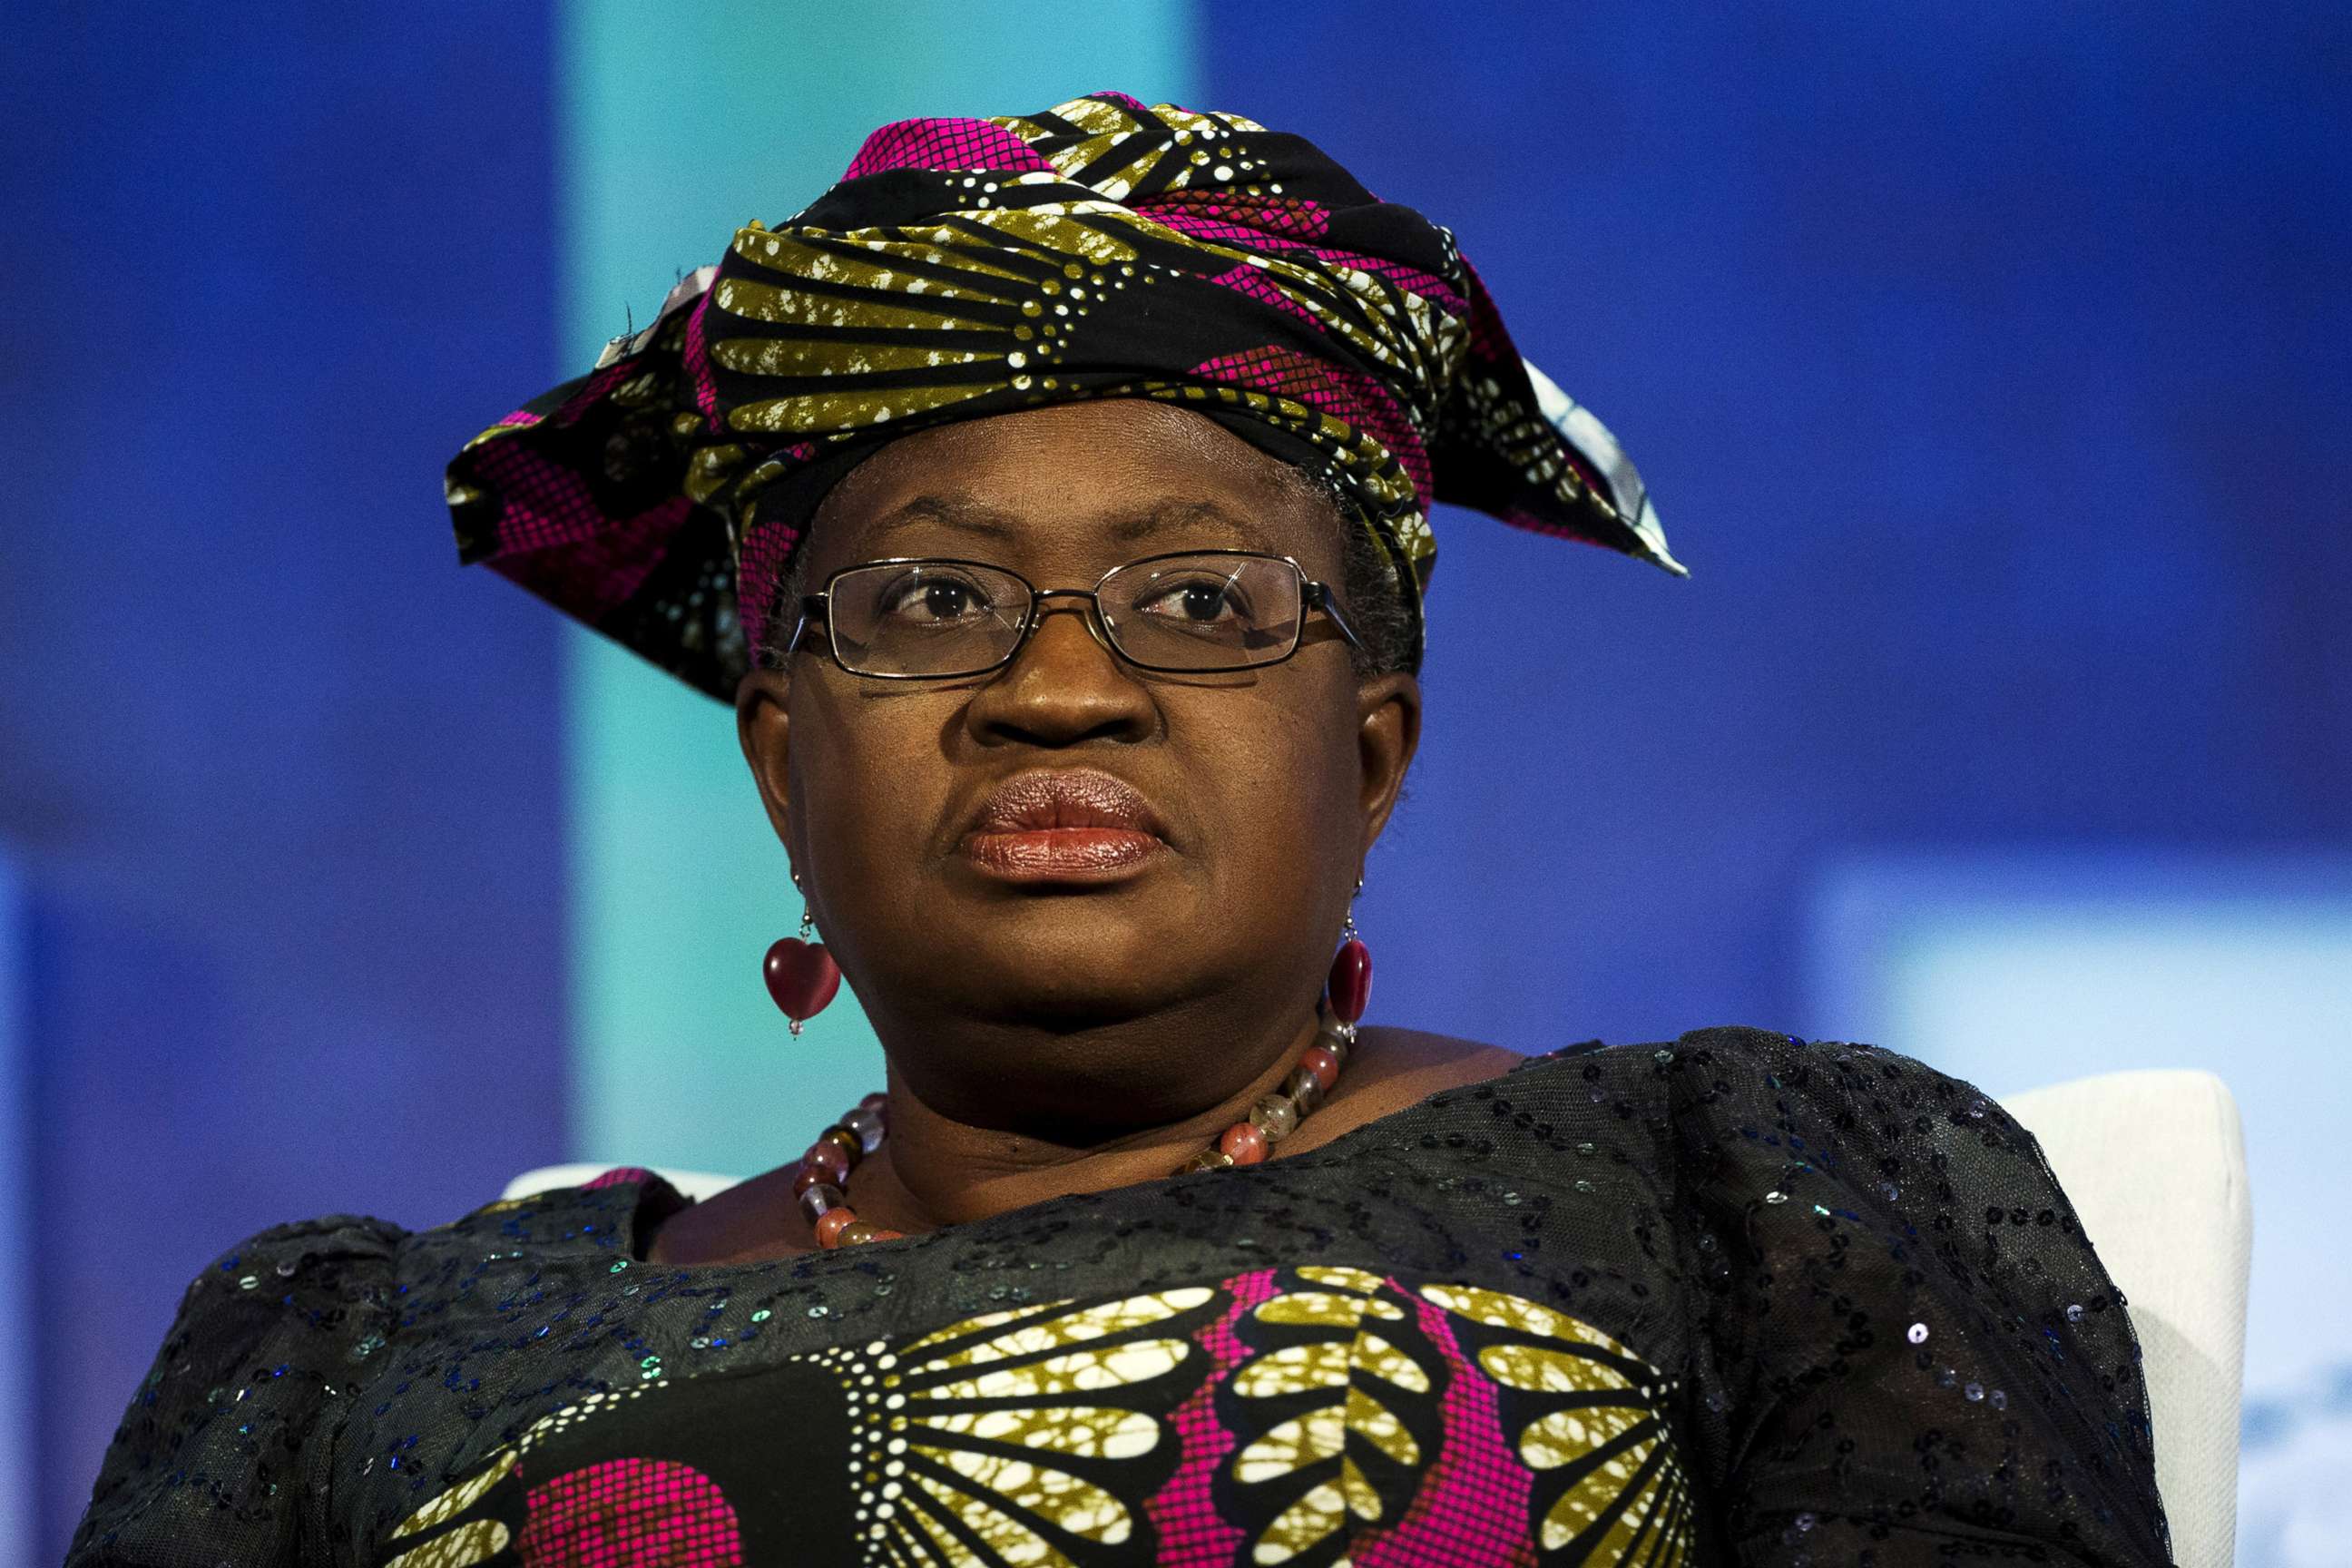 PHOTO: Ngozi Okonjo-Iweala takes part in a panel during the Clinton Global Initiative's annual meeting in New York, Sept. 27, 2015.